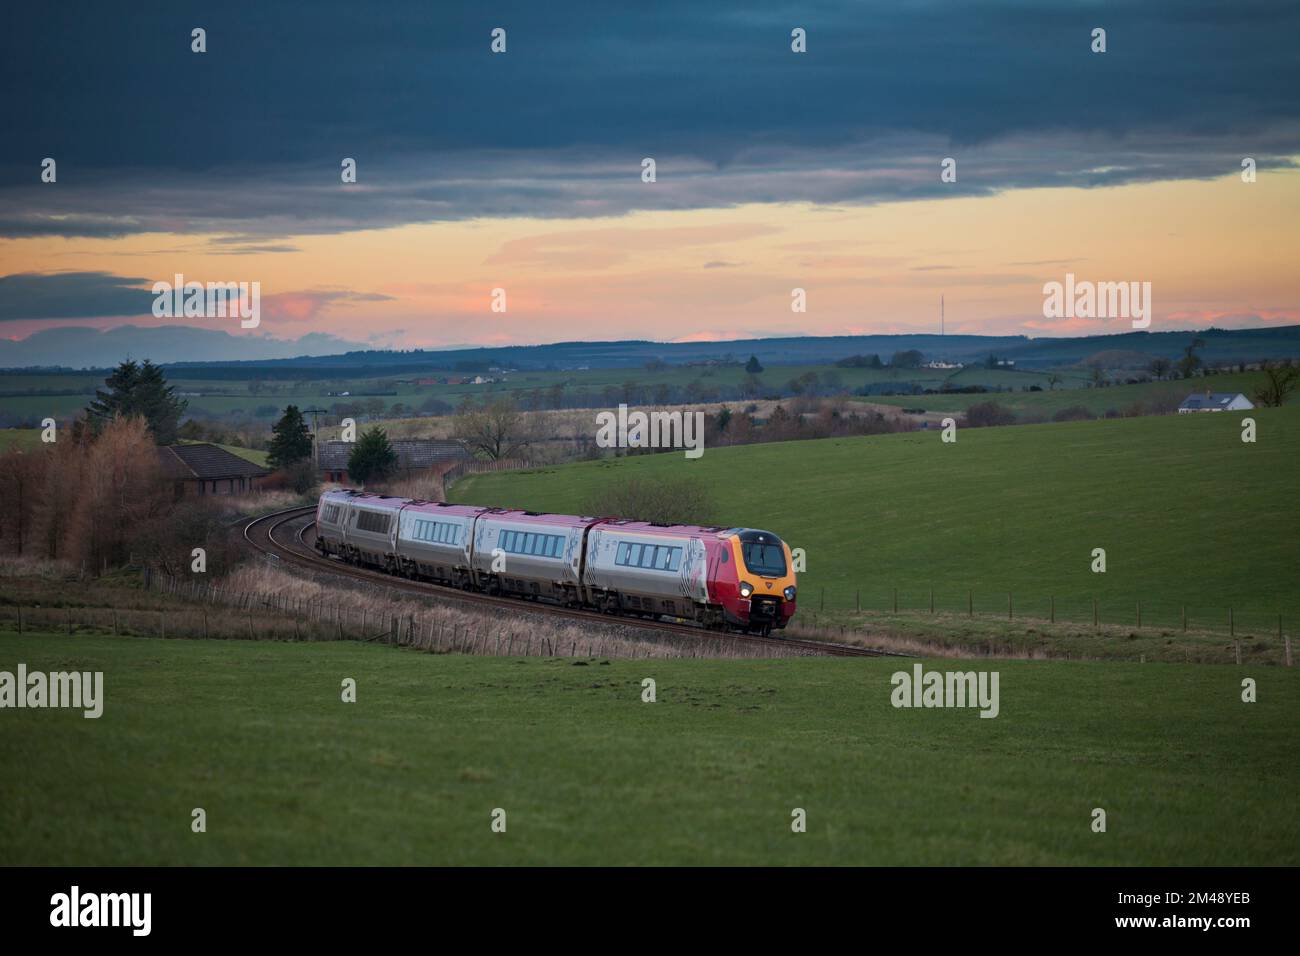 Virgin Trains class 221 voyager train passing Polquip, in rural southern Scotland with a diverted Anglo Scottish train Stock Photo